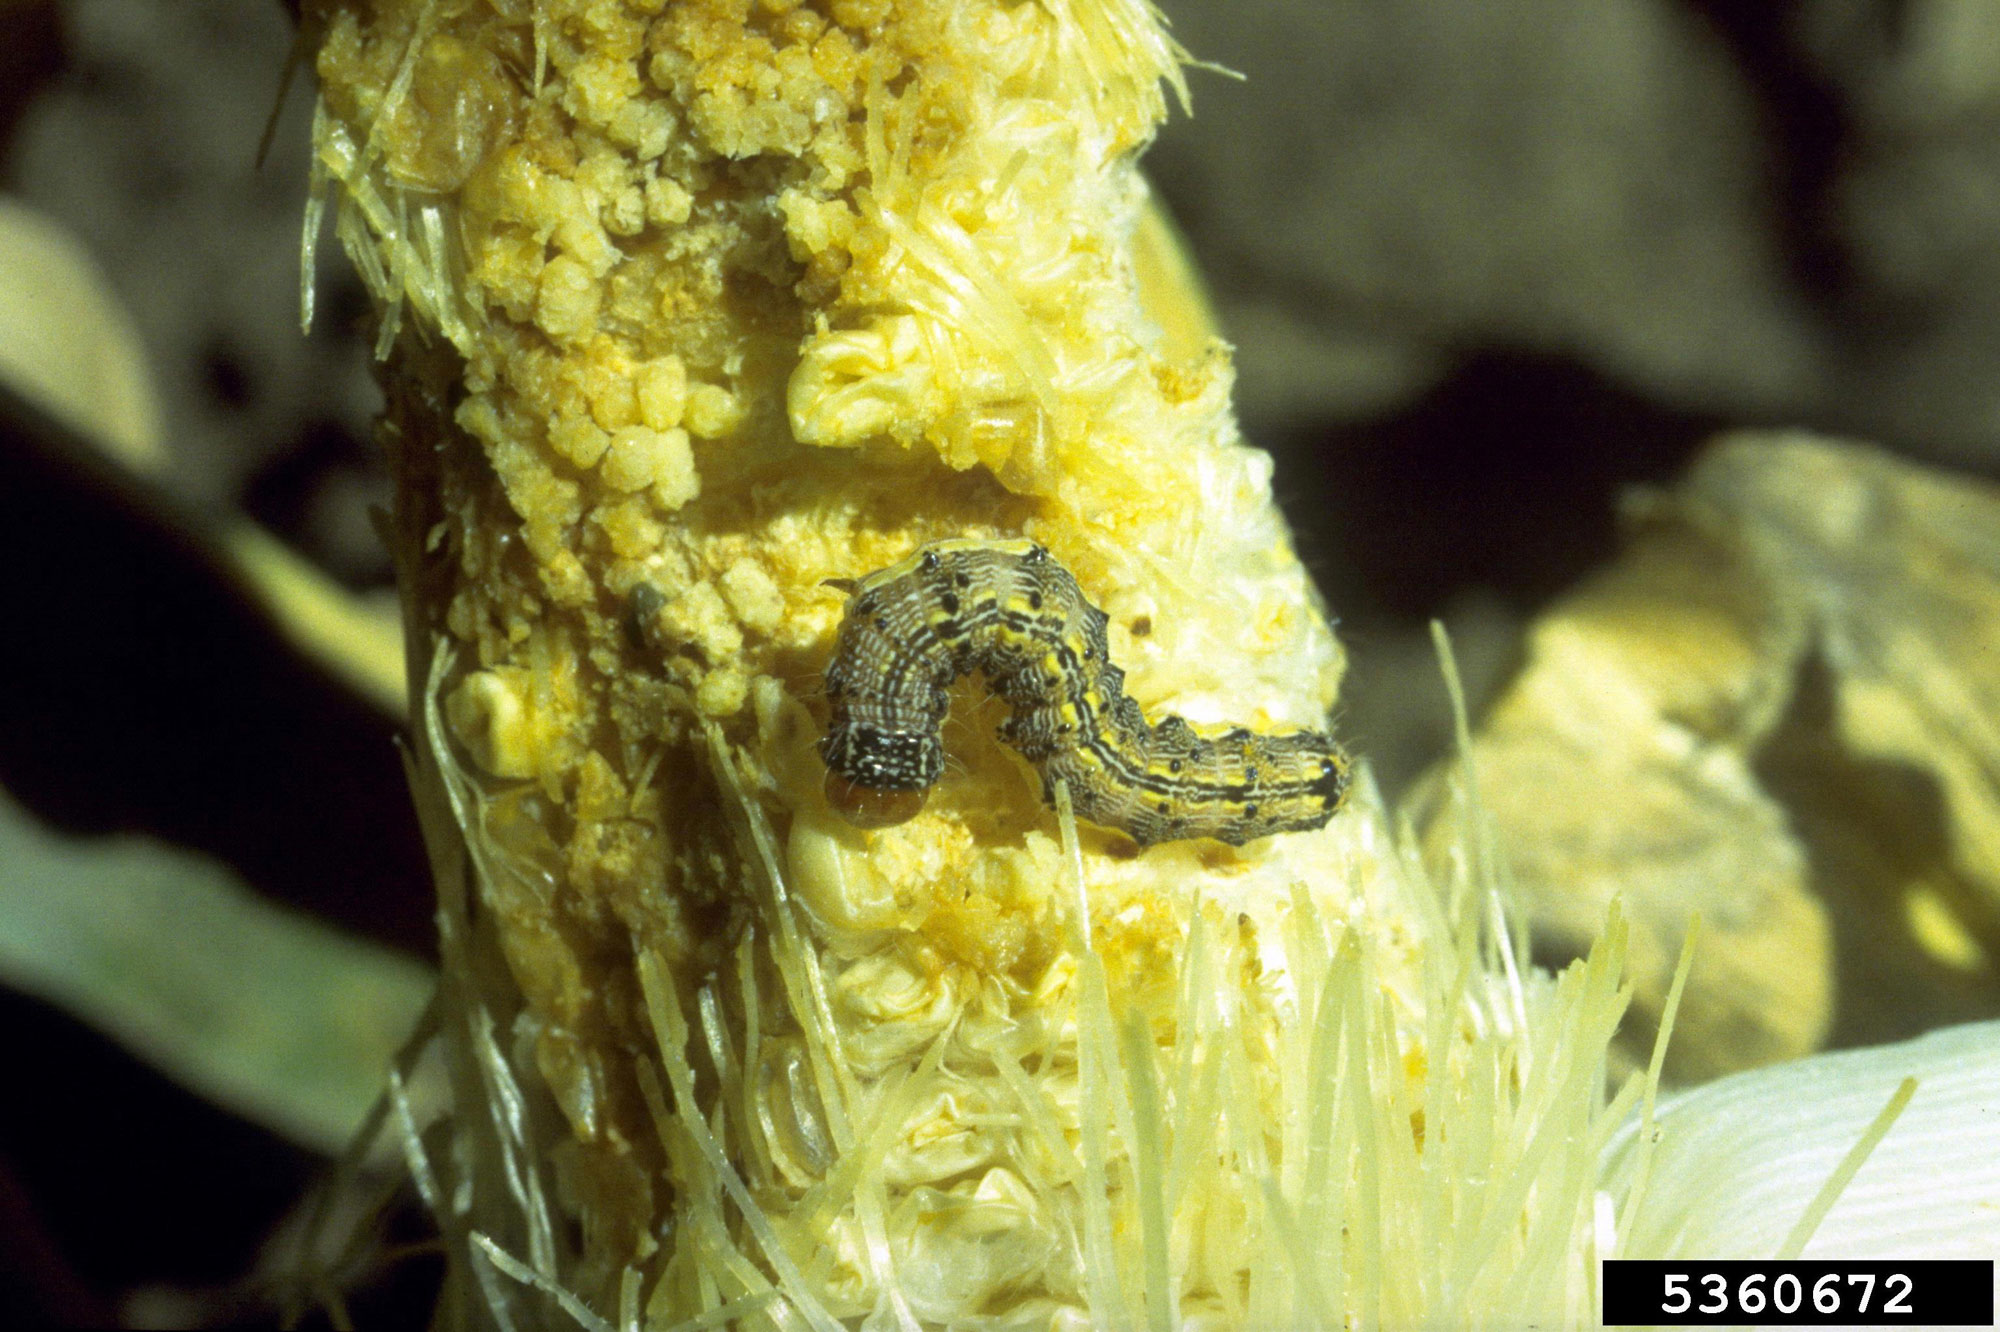 Photograph of an ear of maize with kernels that have been extensively damages. A caterpillar sits on the surface of the maize ear. It is brown with a prominent double black stripe running down its back.